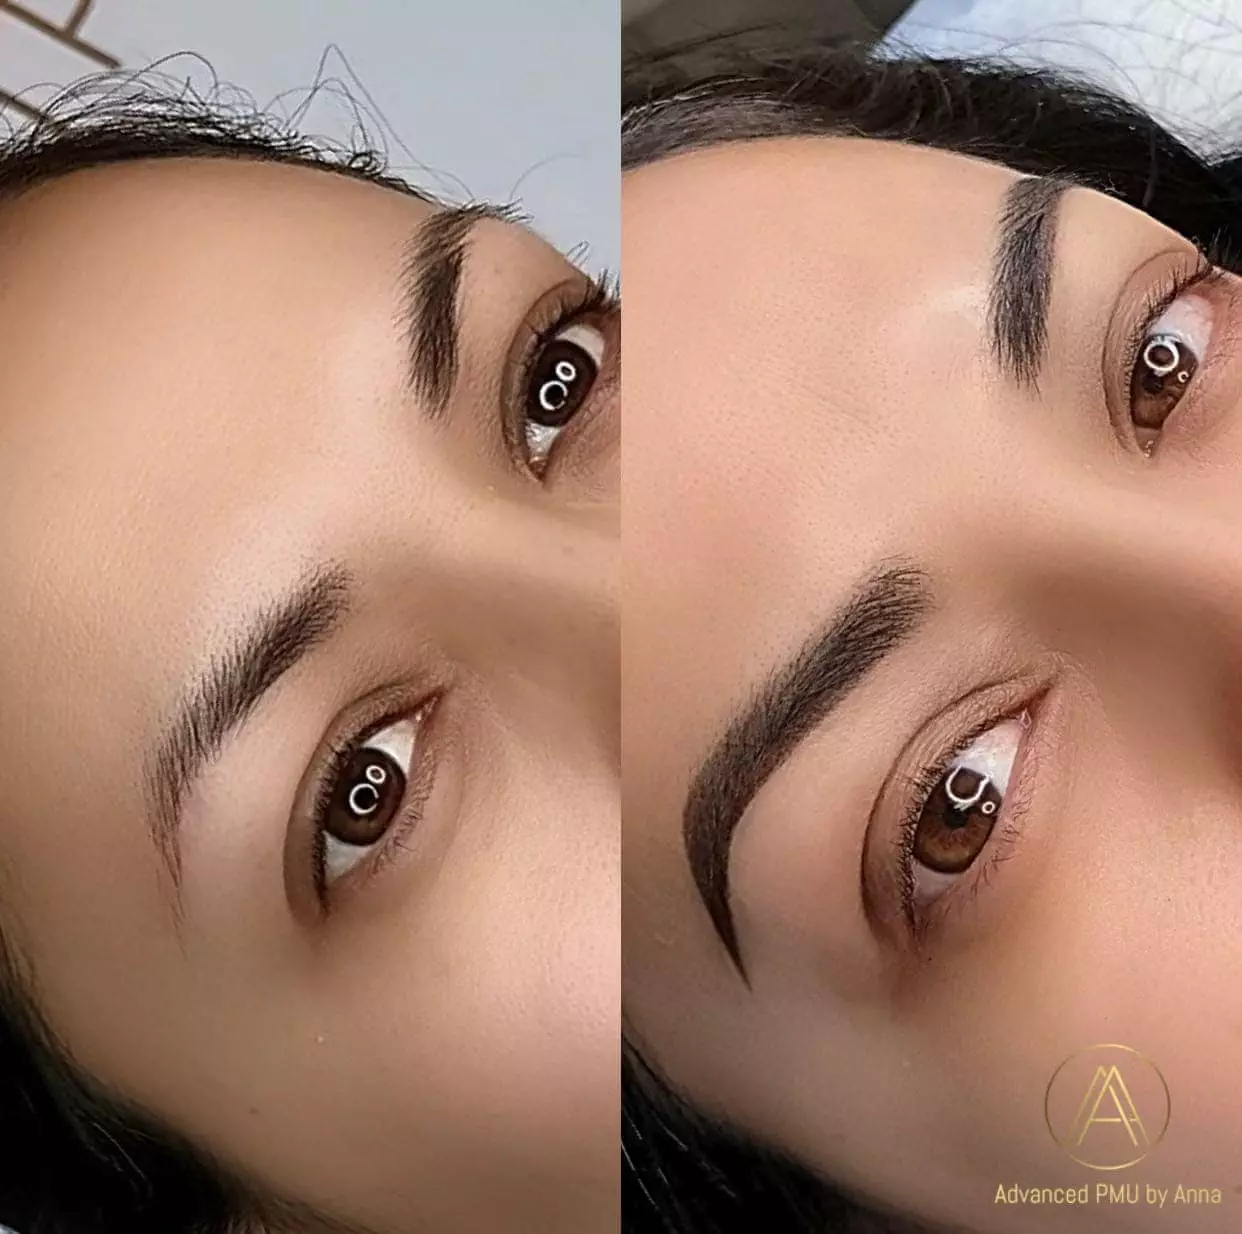 Before and After of Microblading & Shading, Permanent Makeup Eyebrows Before & After